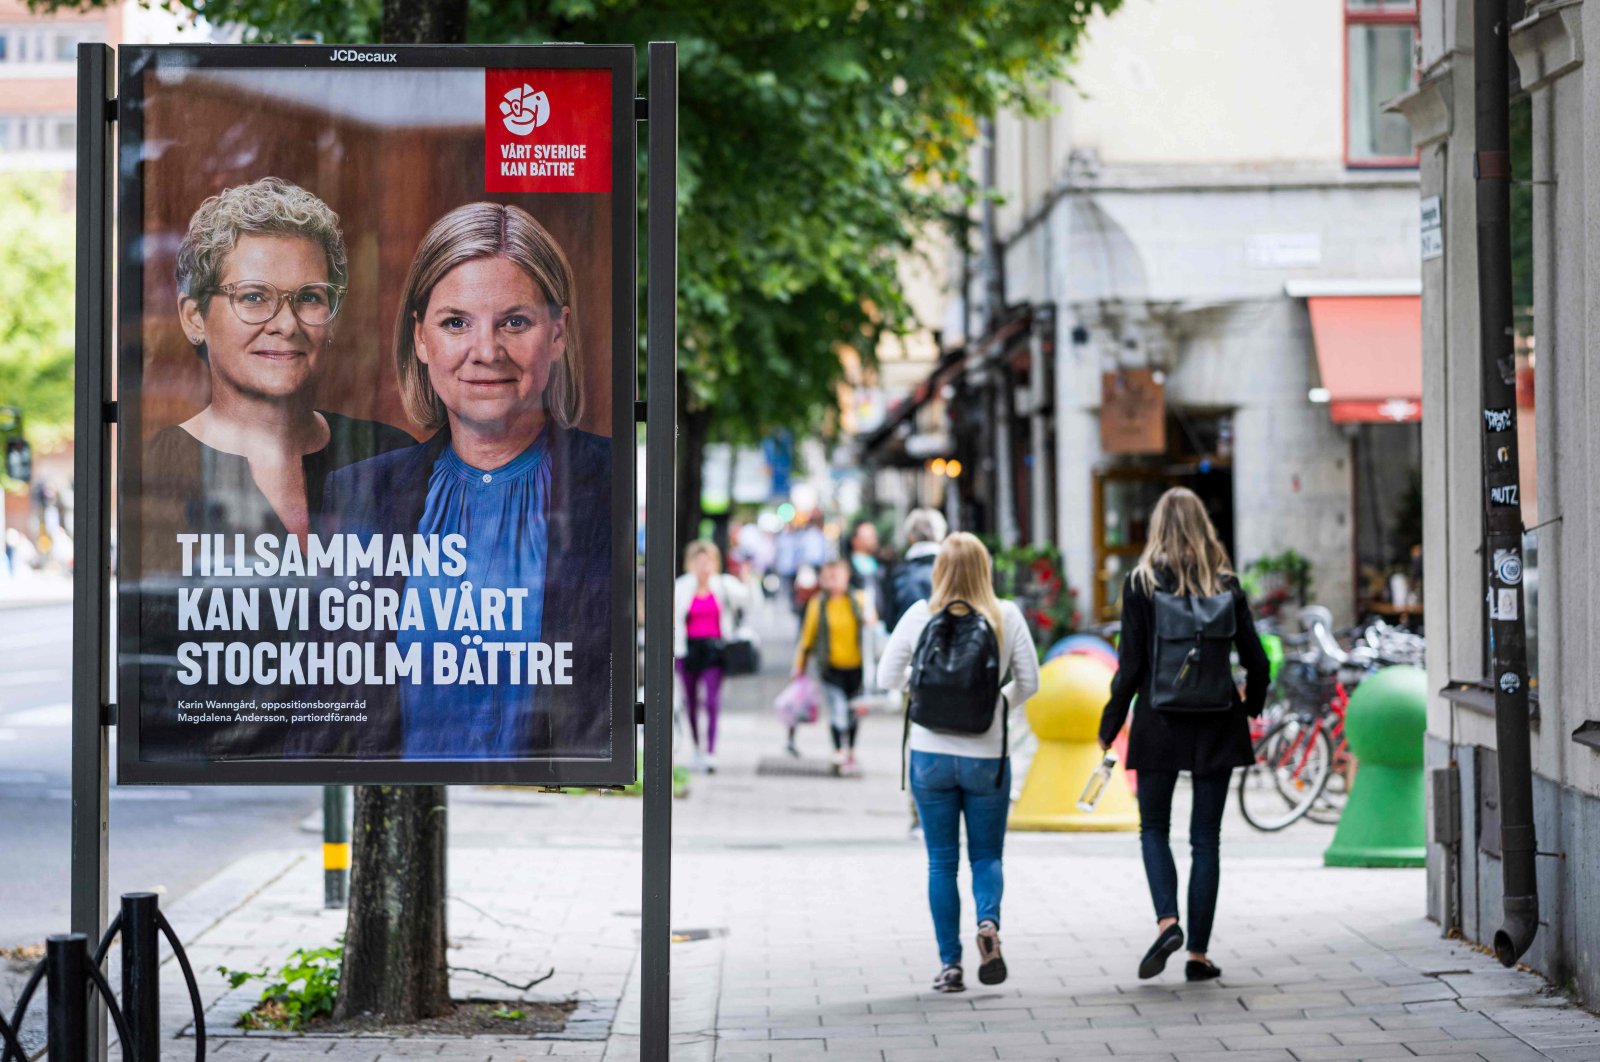 People walk next to election poster of the leader of the Social Democrats and Swedish Prime Minister Magdalena Andersson, in Stockholm, Sweden, Aug. 30, 2022. (AFP Photo)